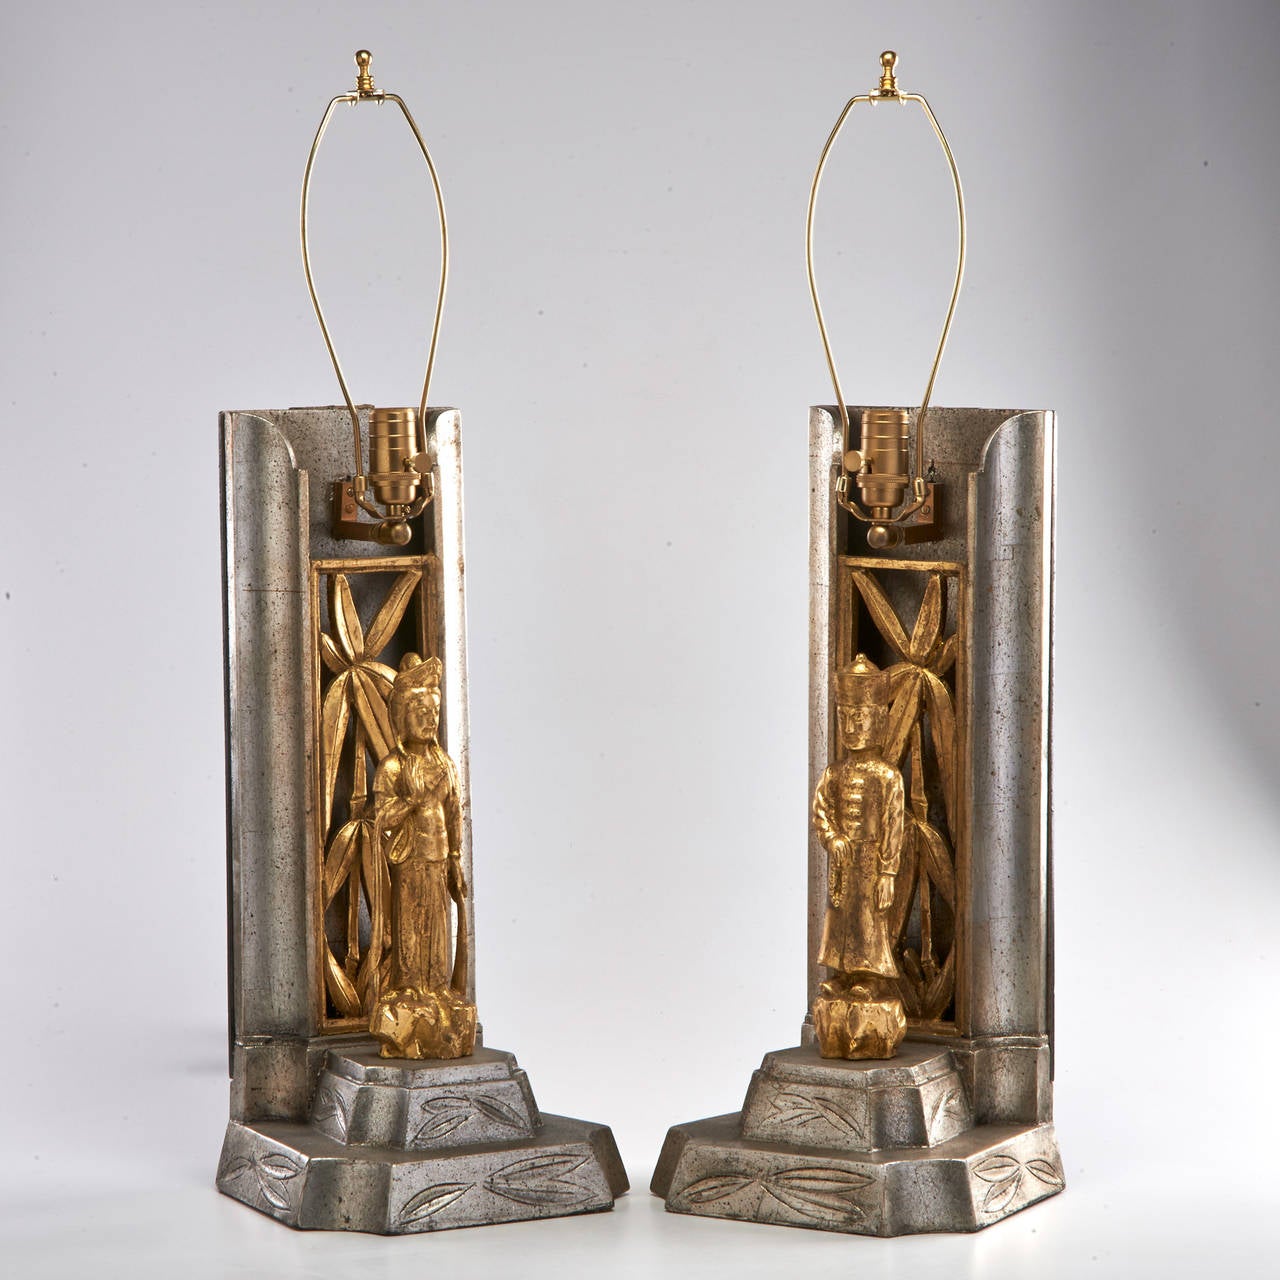 James Mont figural table lamps in the Asian style.
Silvered and giltwood-newly rewired.
New York, 1960s.